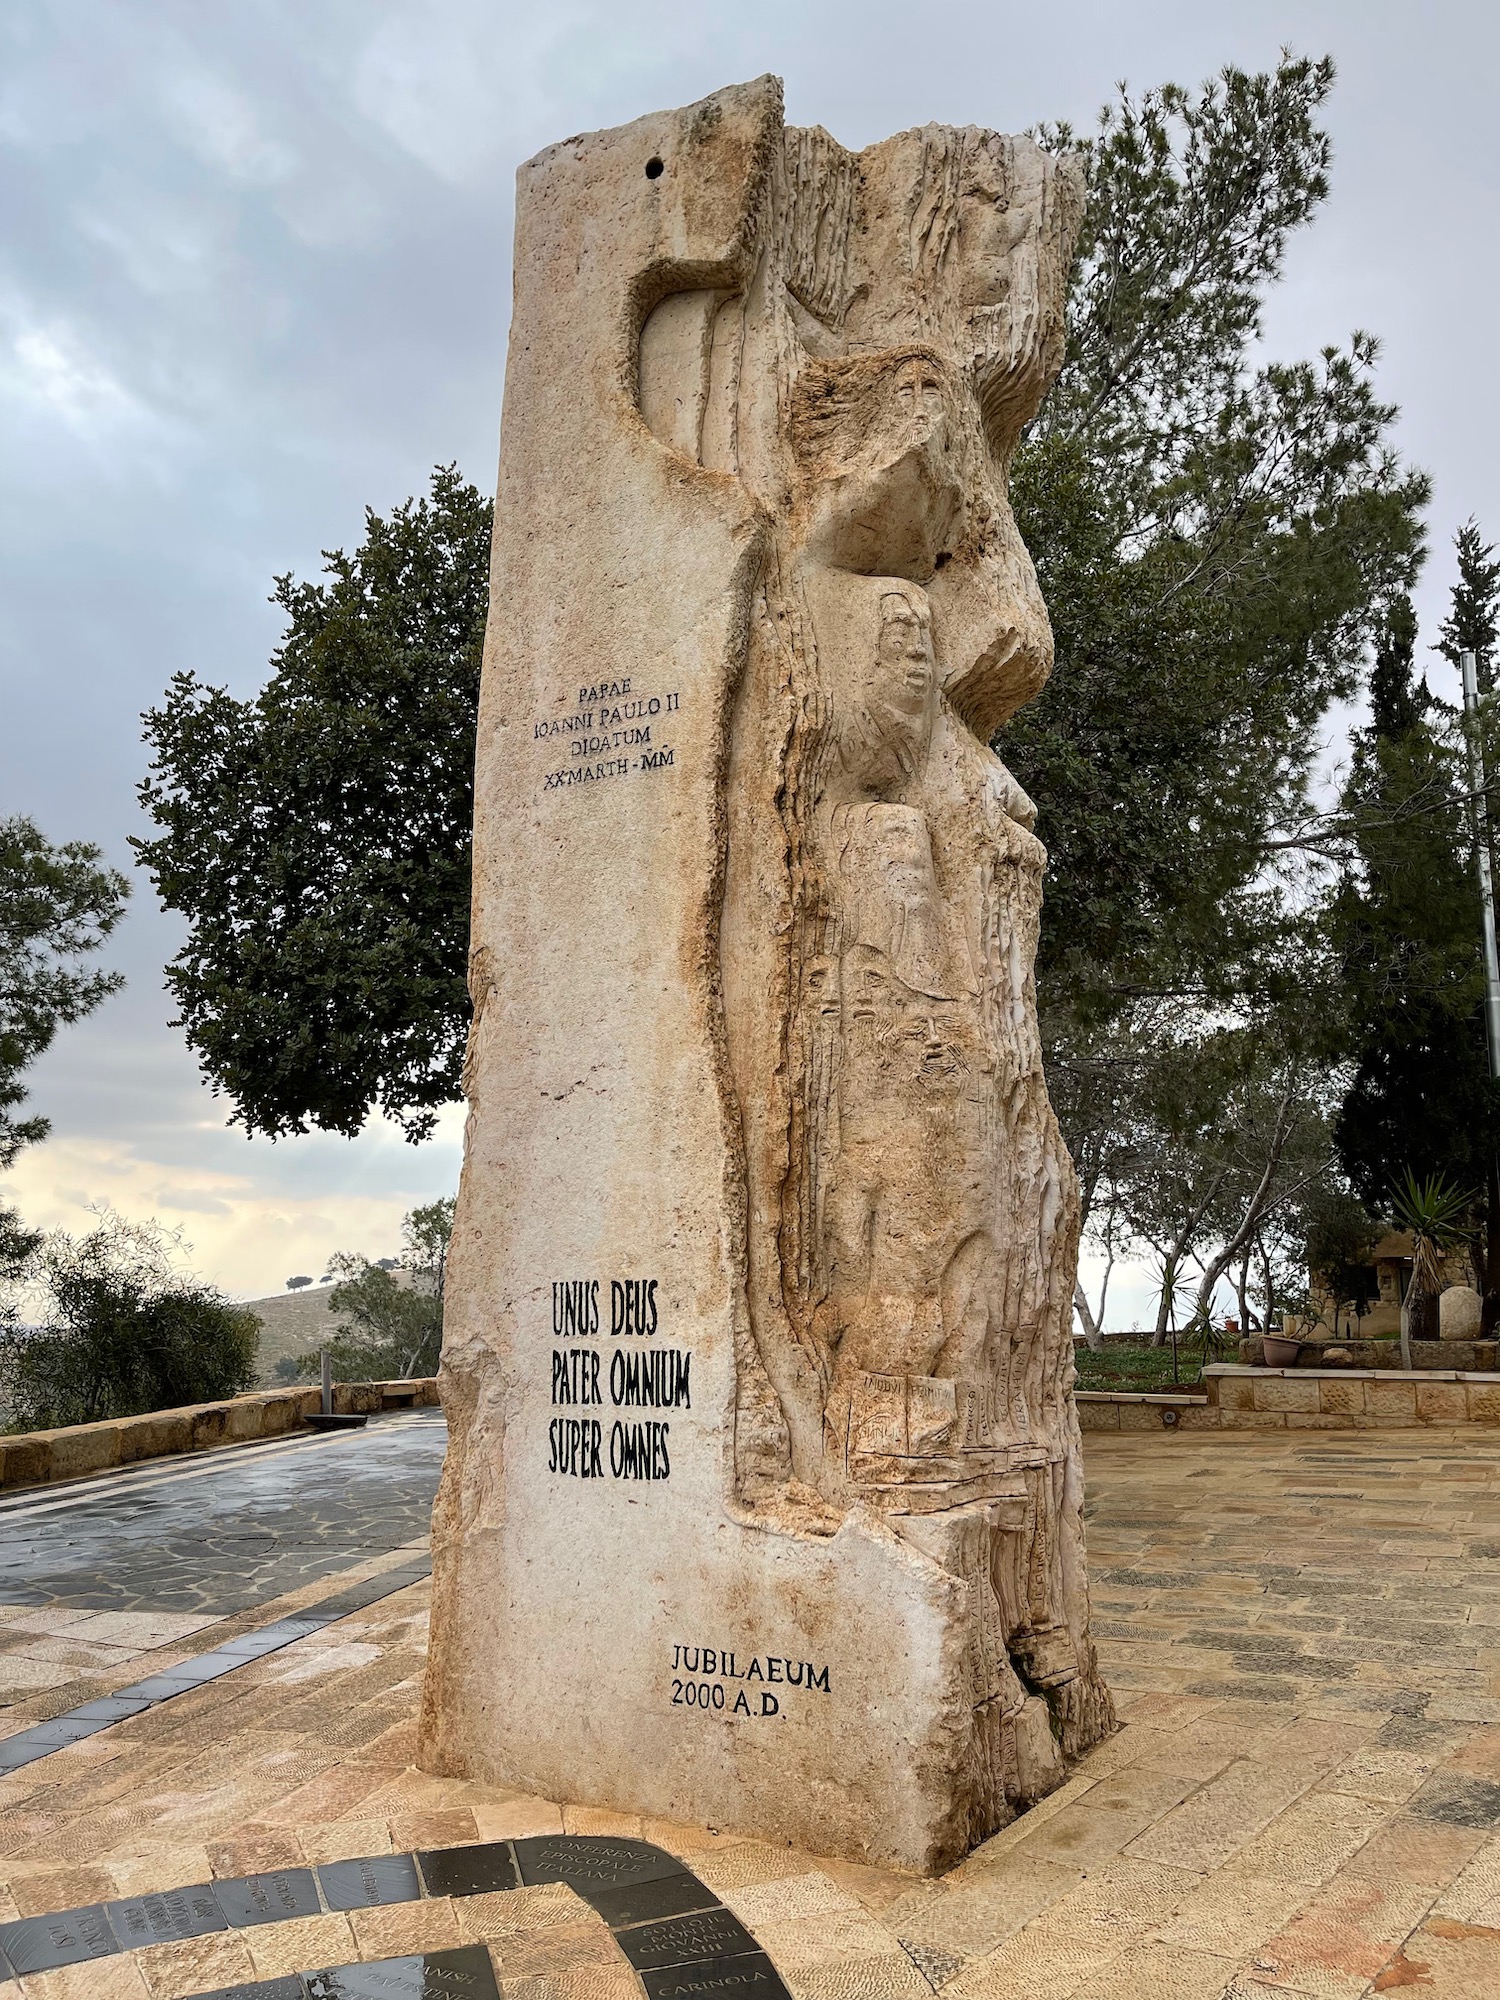 a large stone pillar with writing on it